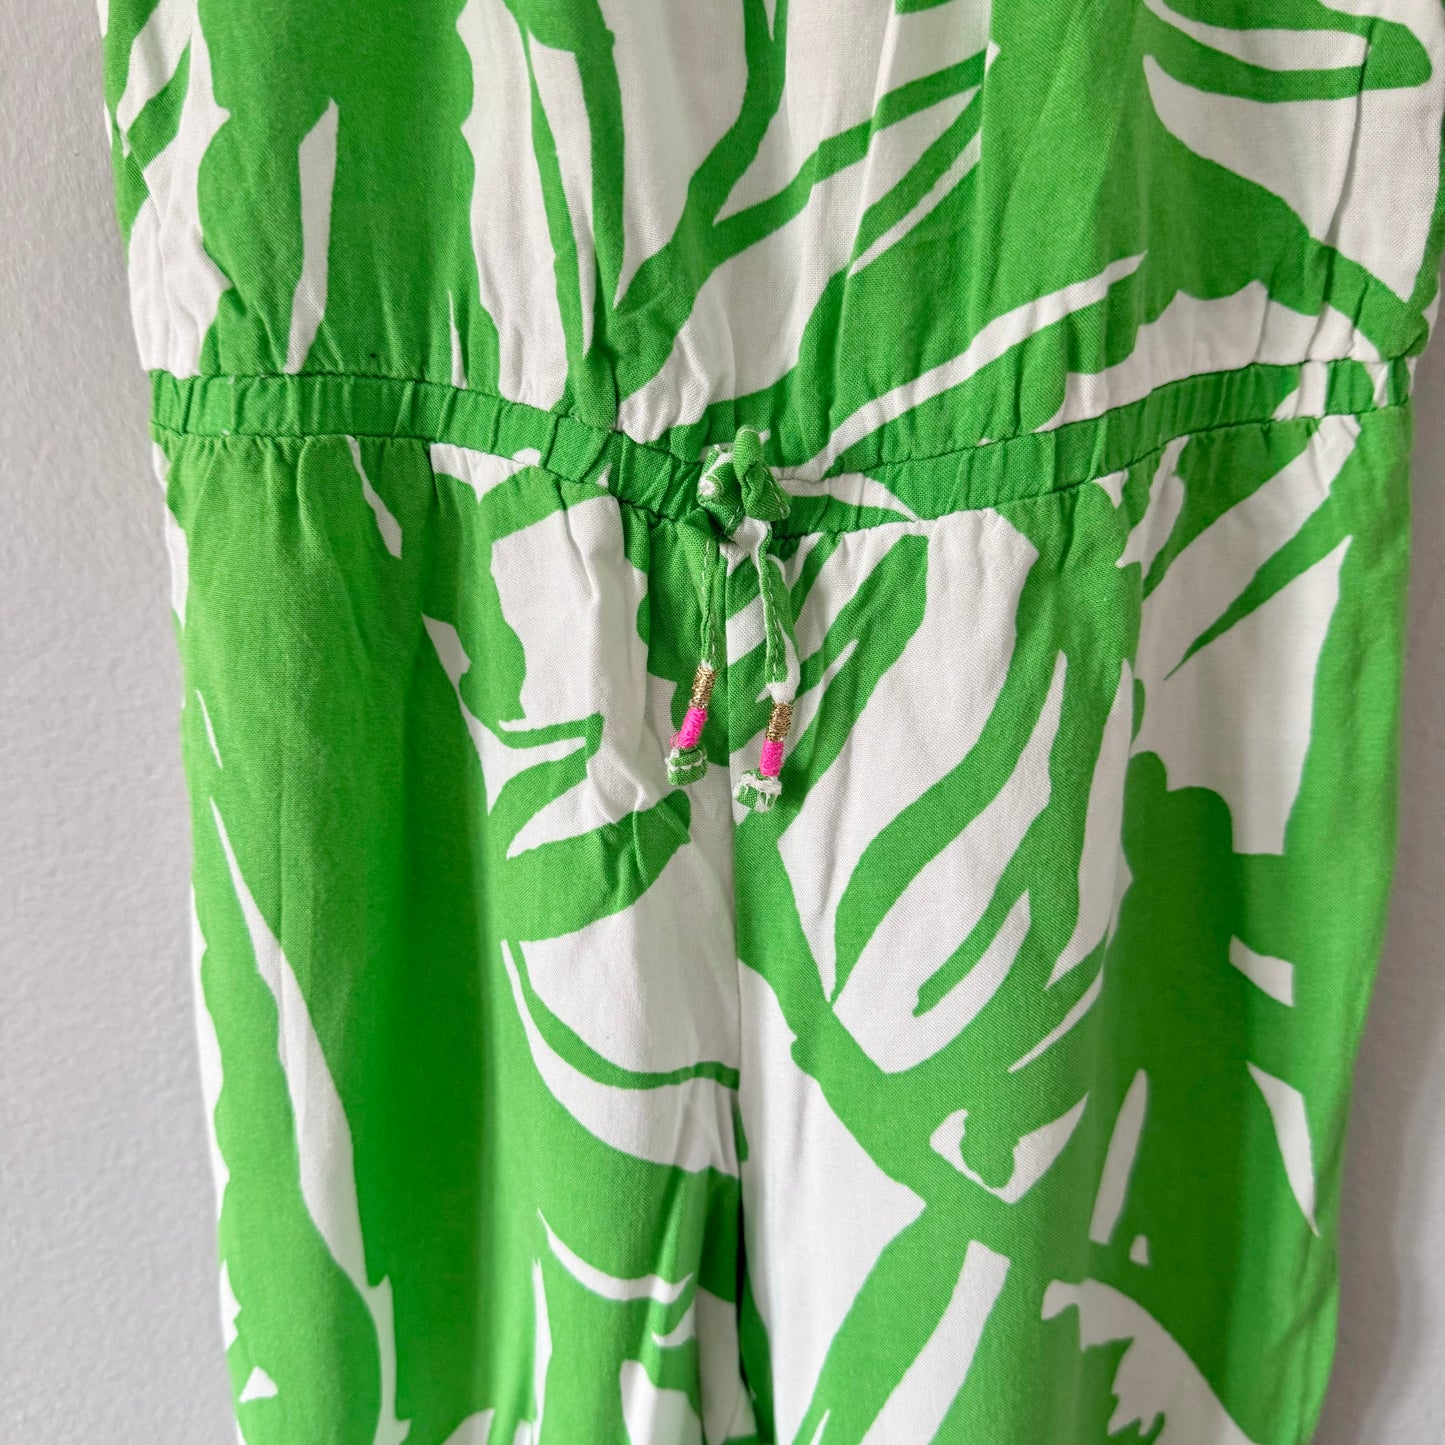 Lilly Pulitzer / White x green cami jumpsuit / 4T